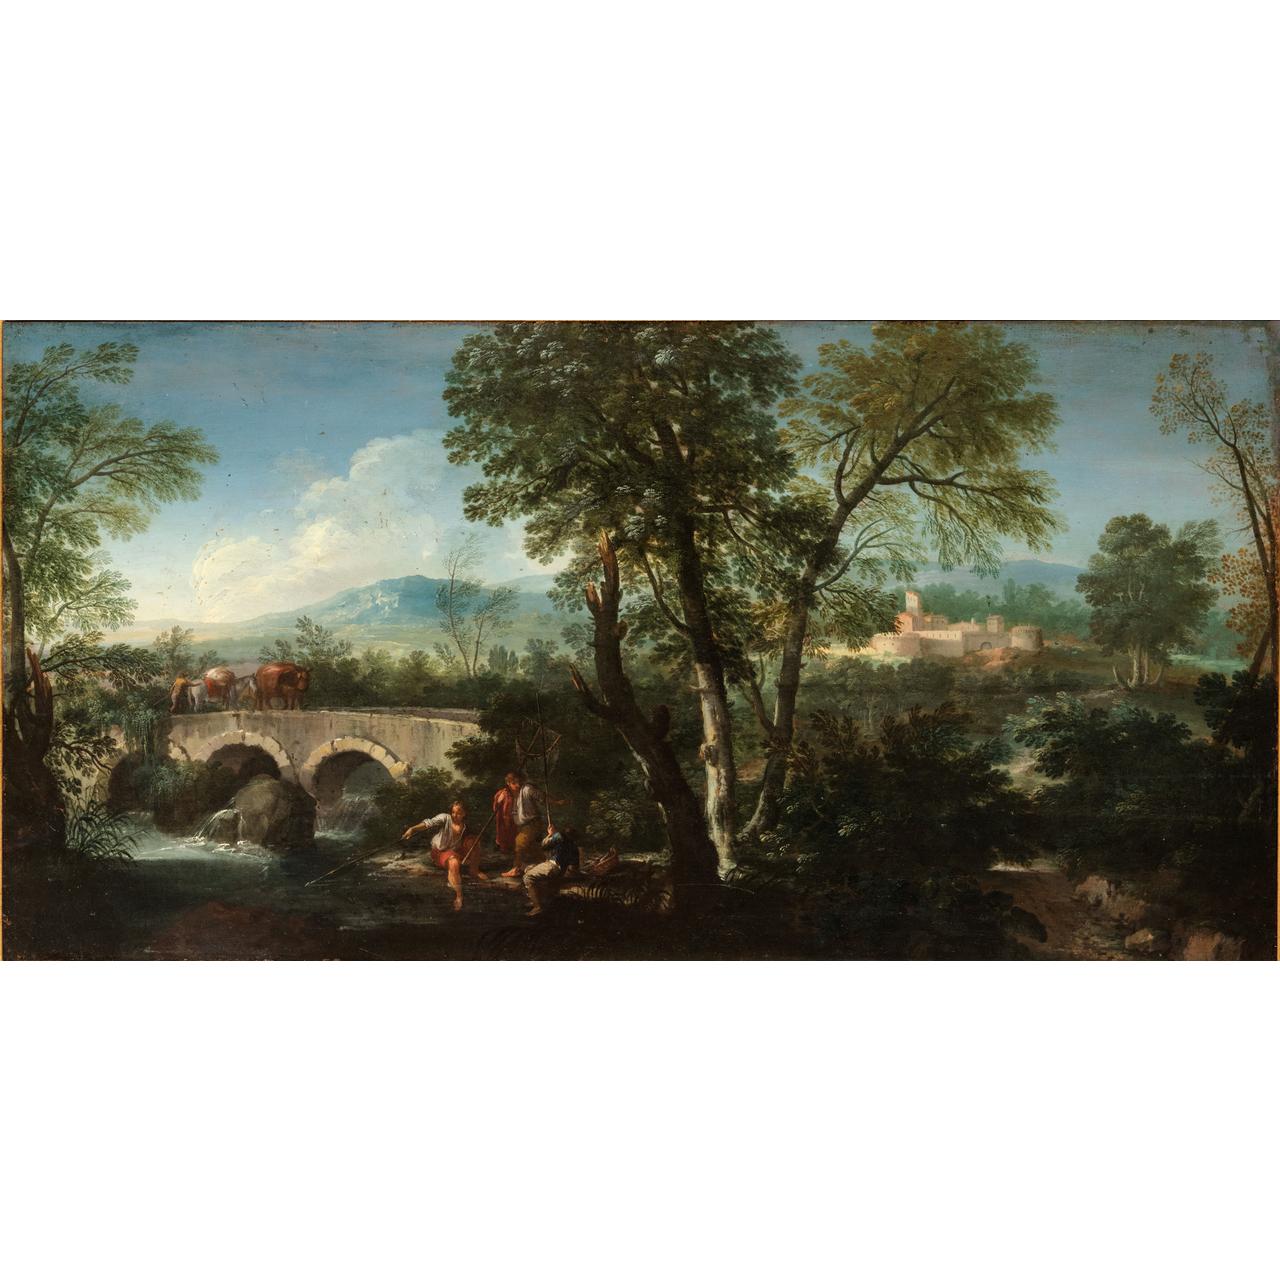 Dipinto: View of the Roman Countryside